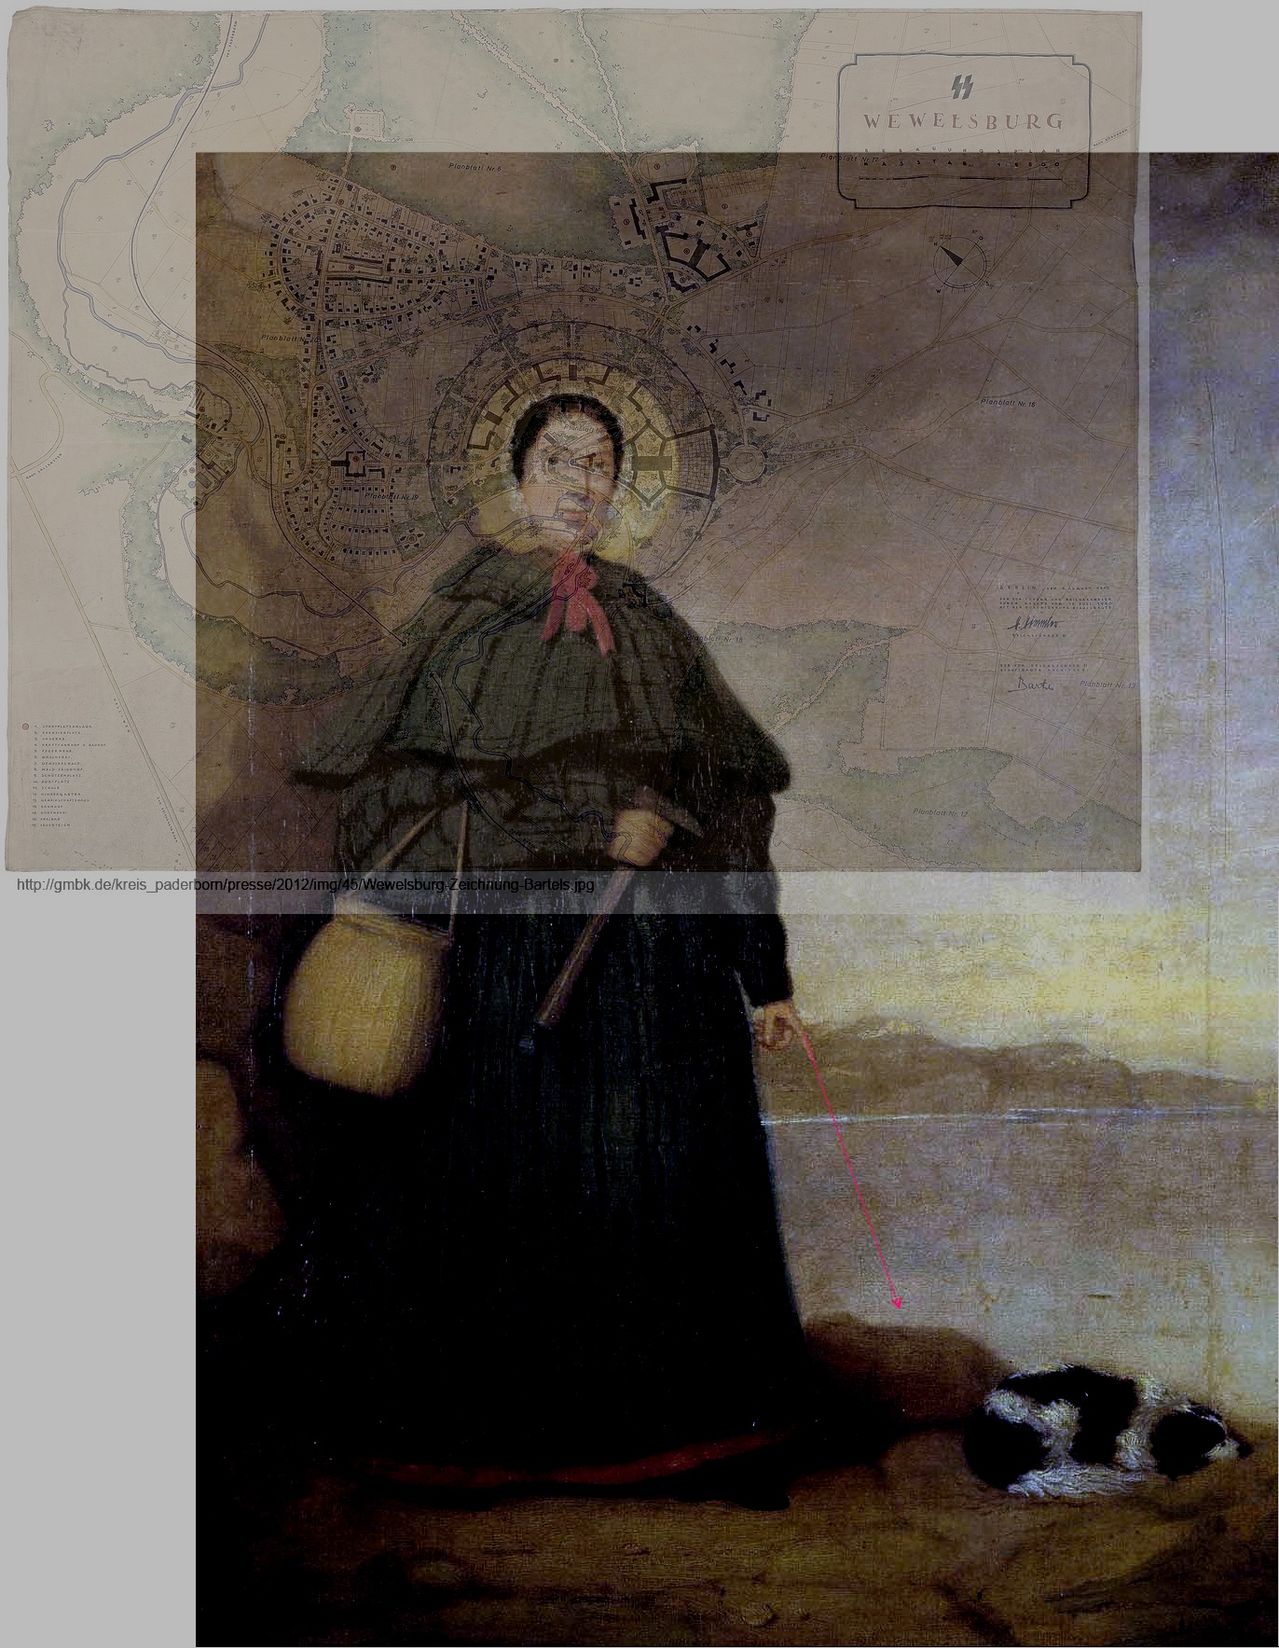 Mary Anning Quotes. QuotesGram